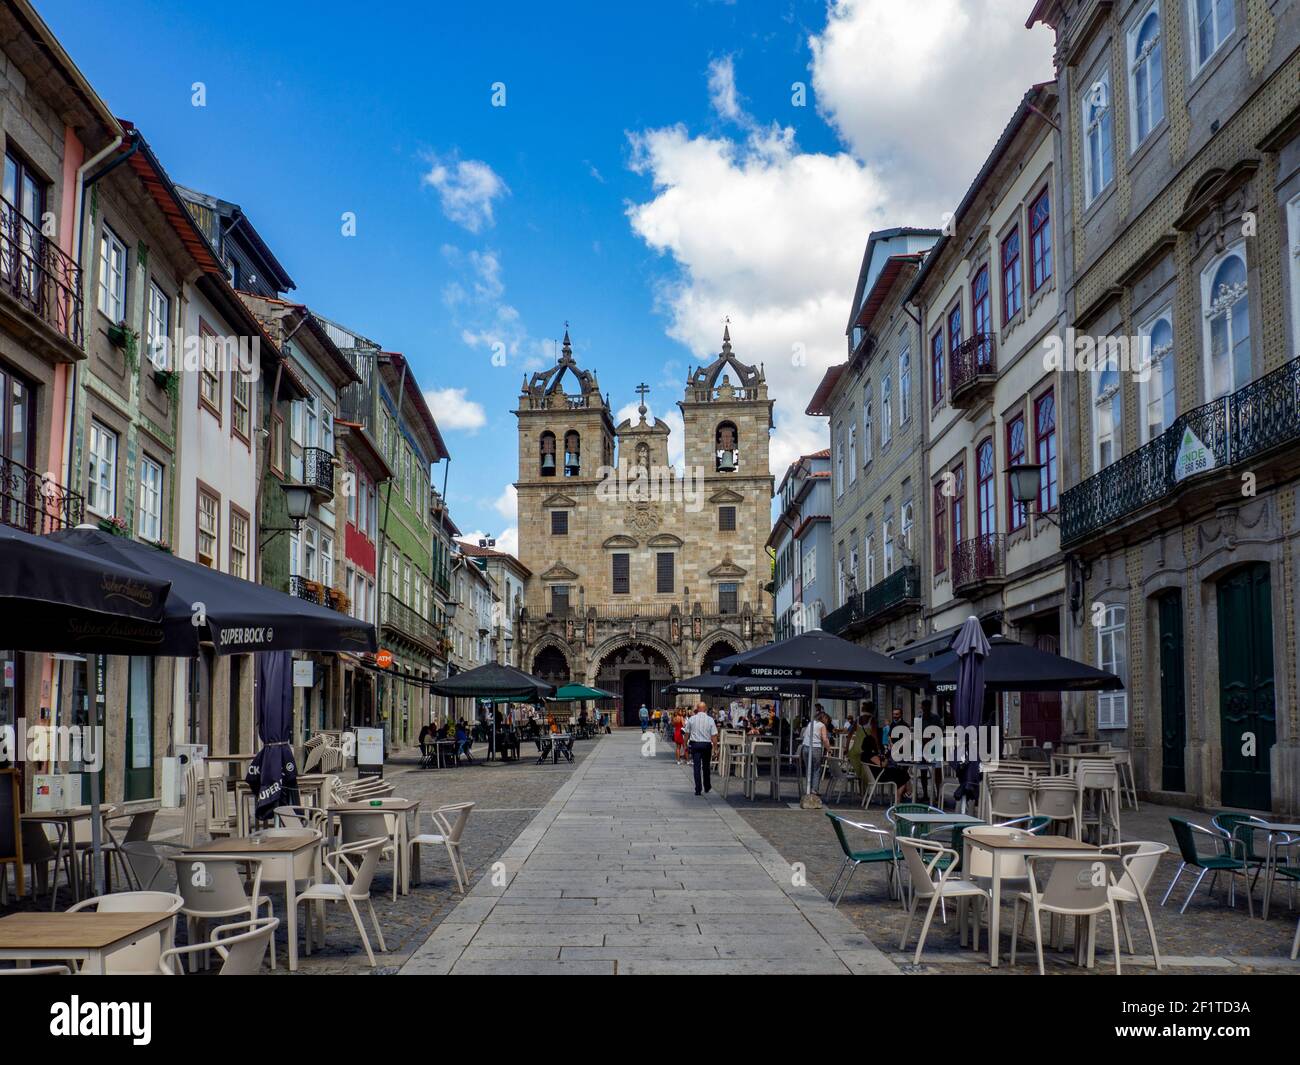 Braga, Portugal ; August 2020 : The Cathedral of Braga (Se de Braga) is one of the most important monuments in Braga, Portugal Stock Photo